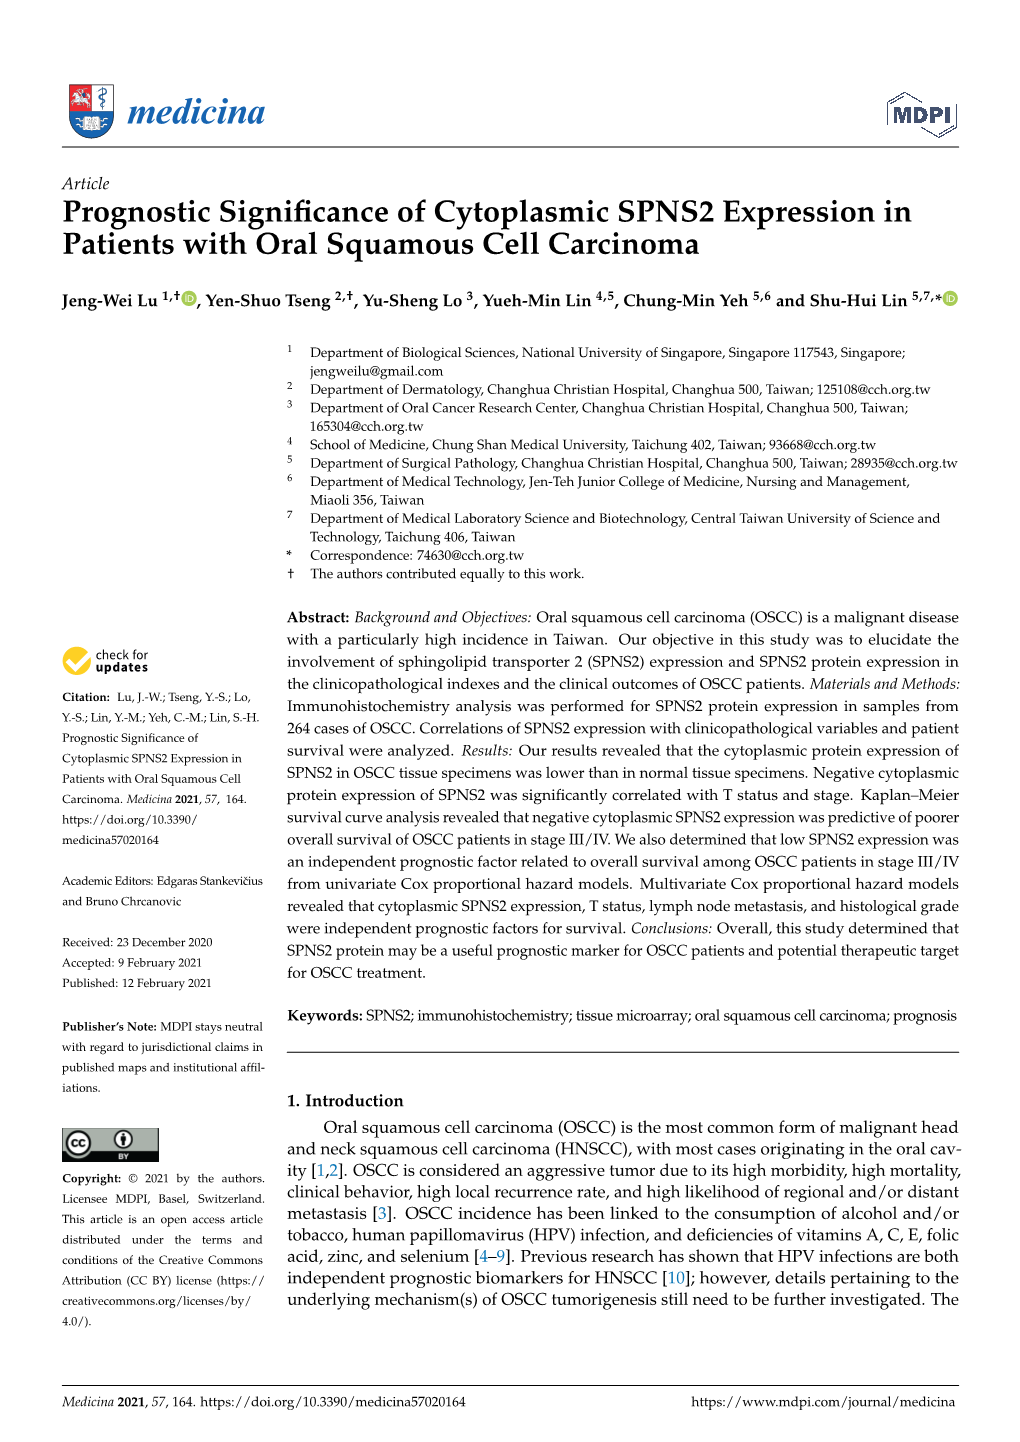 Prognostic Significance of Cytoplasmic SPNS2 Expression in Patients with Oral Squamous Cell Carcinoma